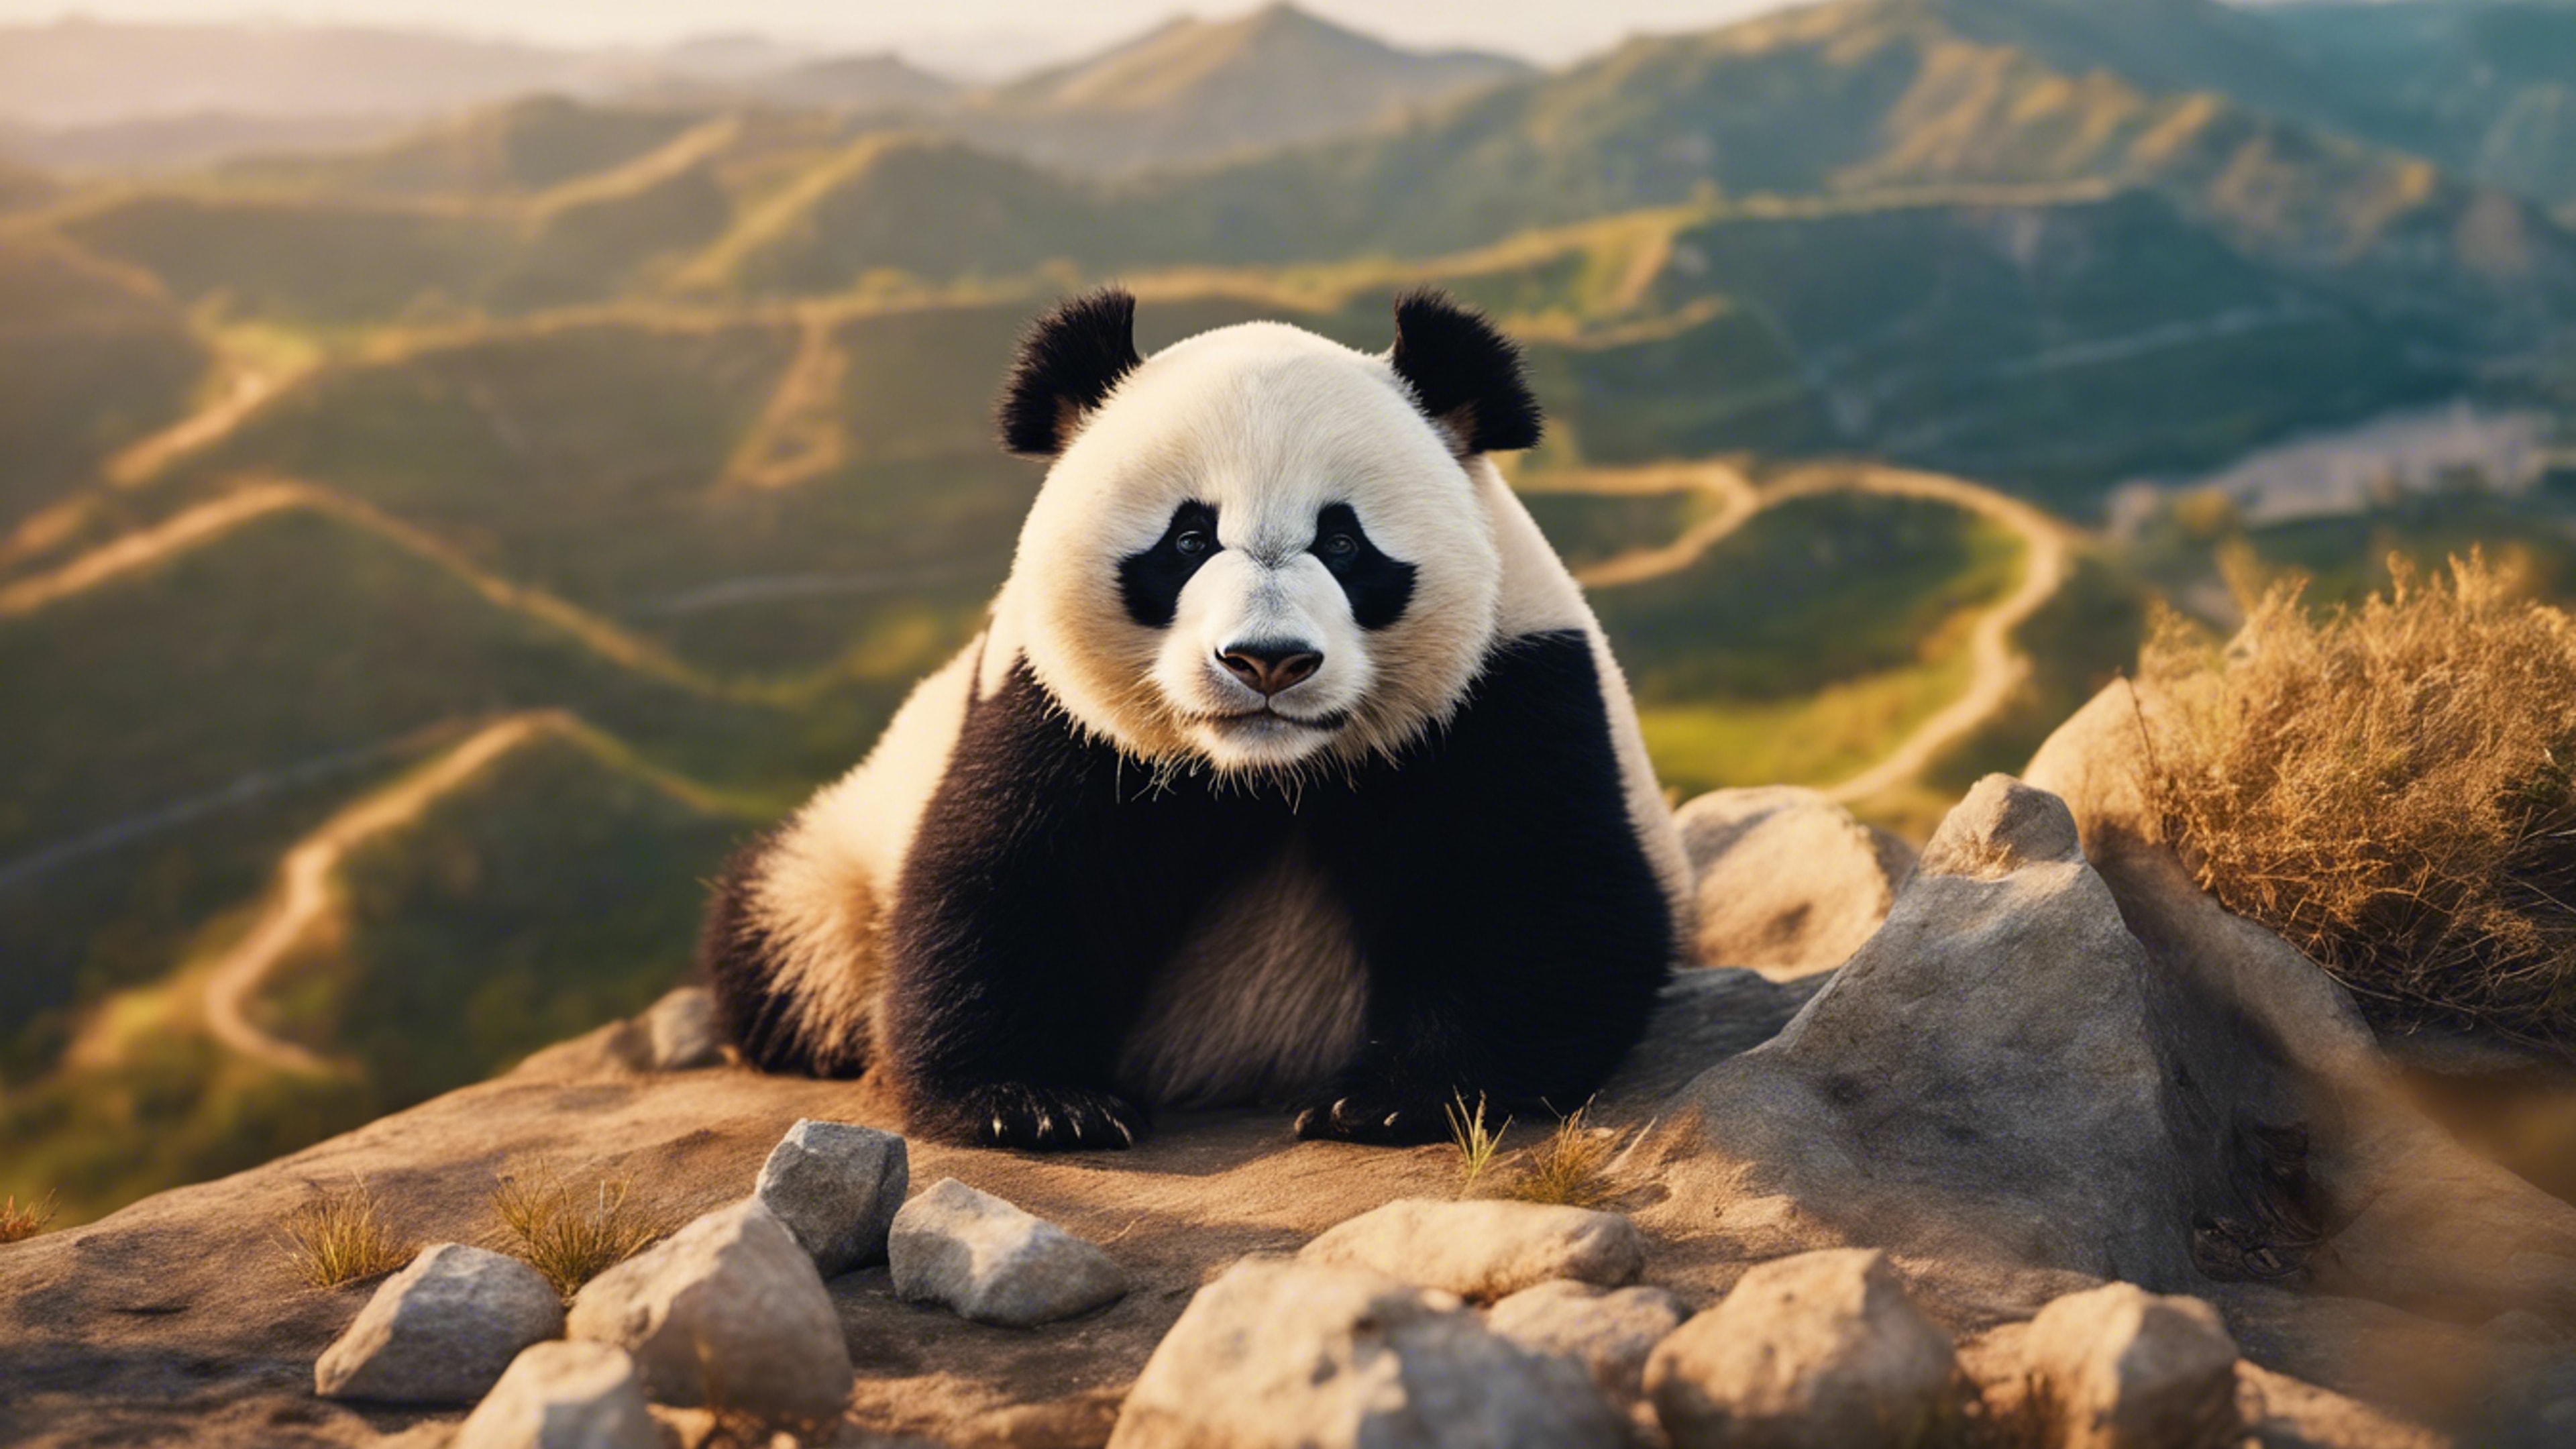 A proud panda basking in the warm sunlight, on a cliff overlooking a wide, beautiful valley. 牆紙[f1b4c4cbced14ad39a34]